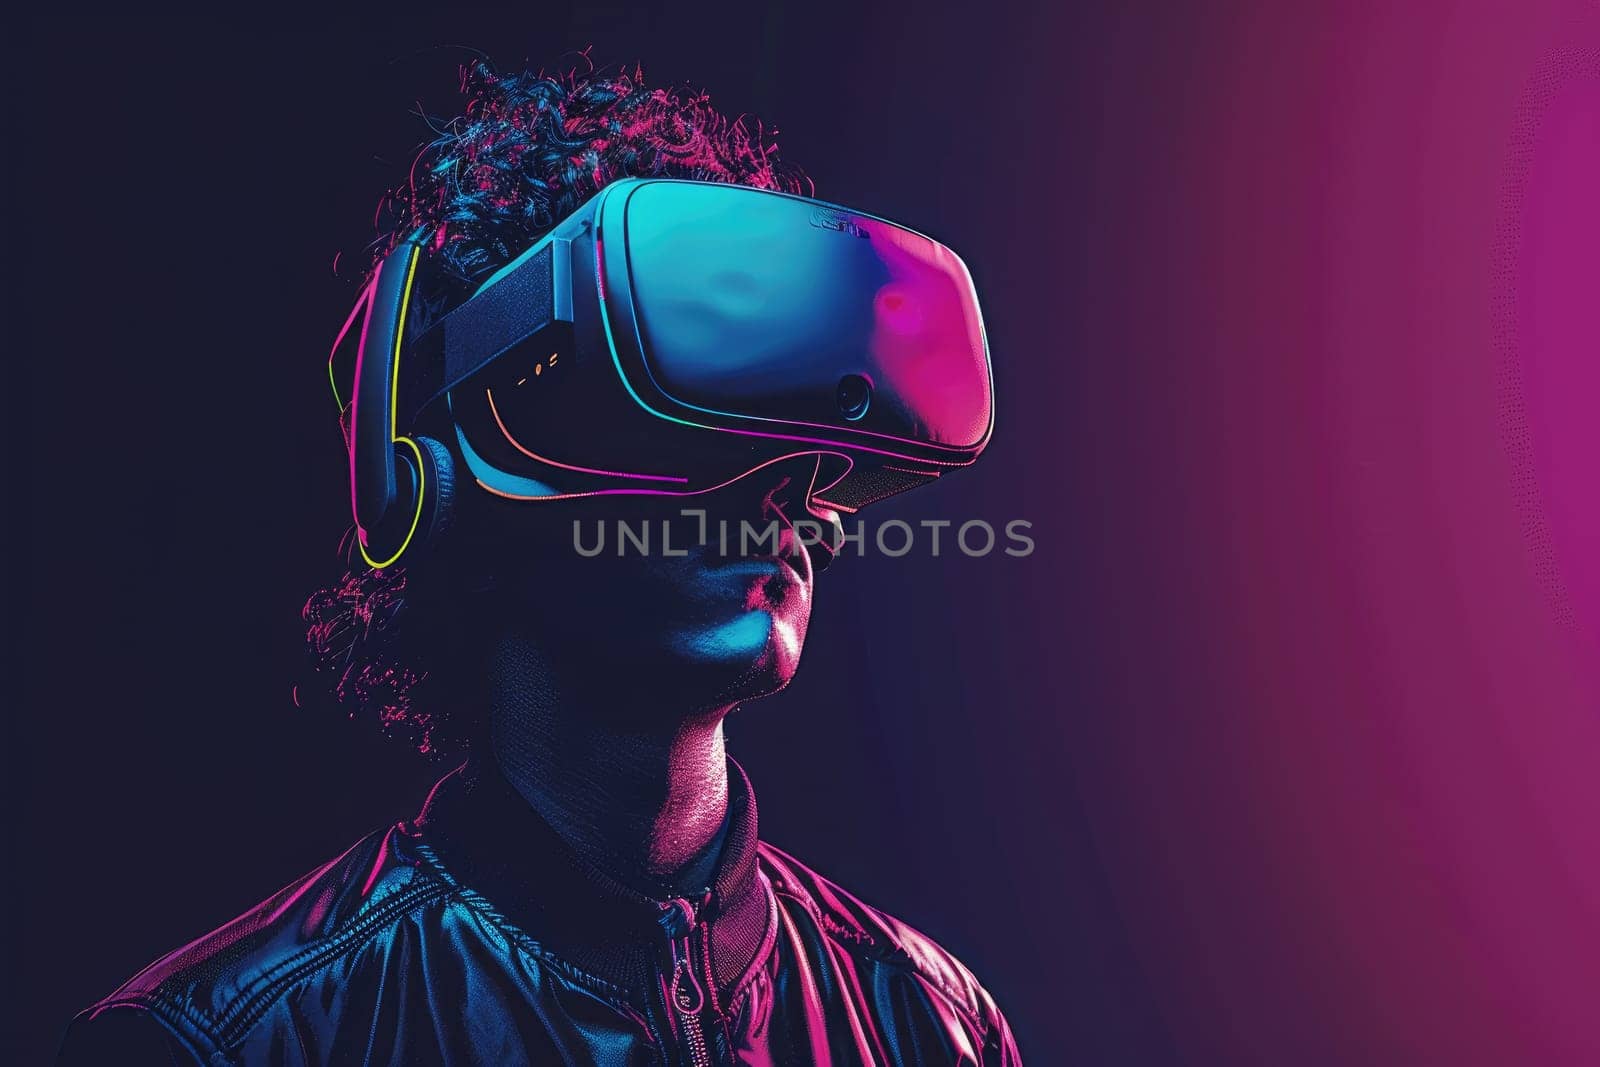 A man wearing a VR headset is standing in front of a vibrant colors background.